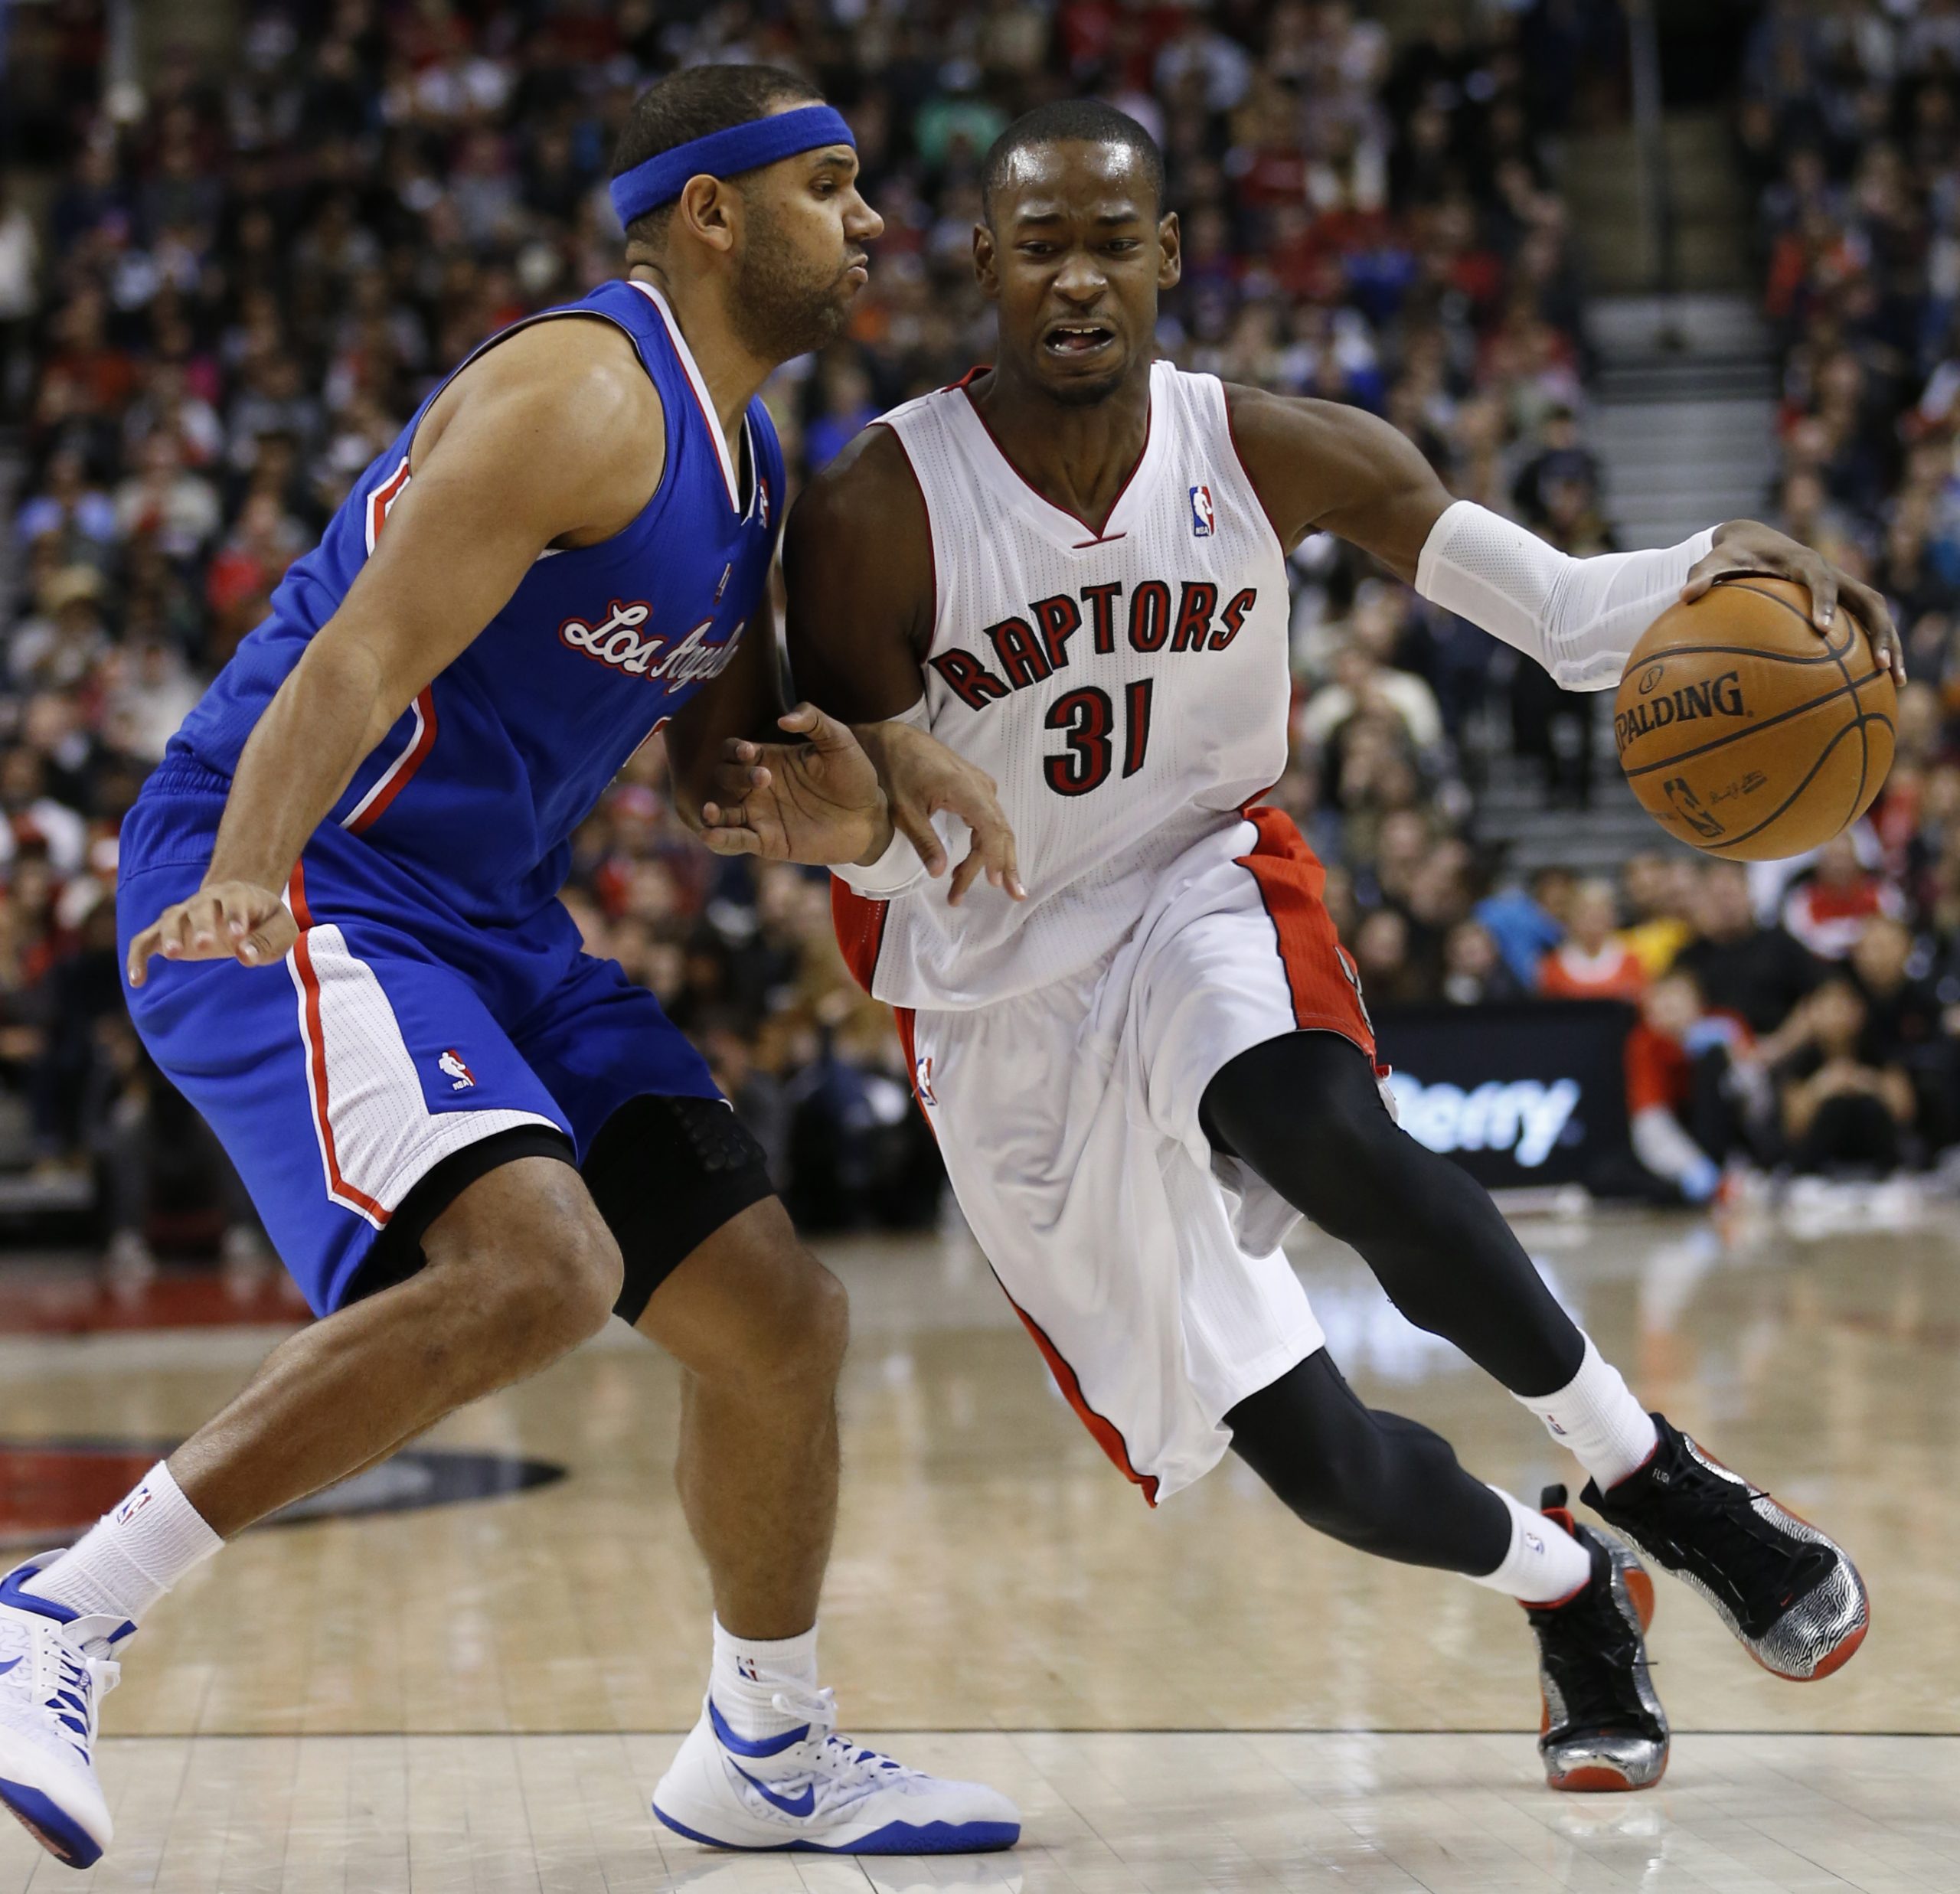 Former Toronto Raptors drives by Los Angeles Clippers forward Jared Dudley on Jan. 25, 2014.